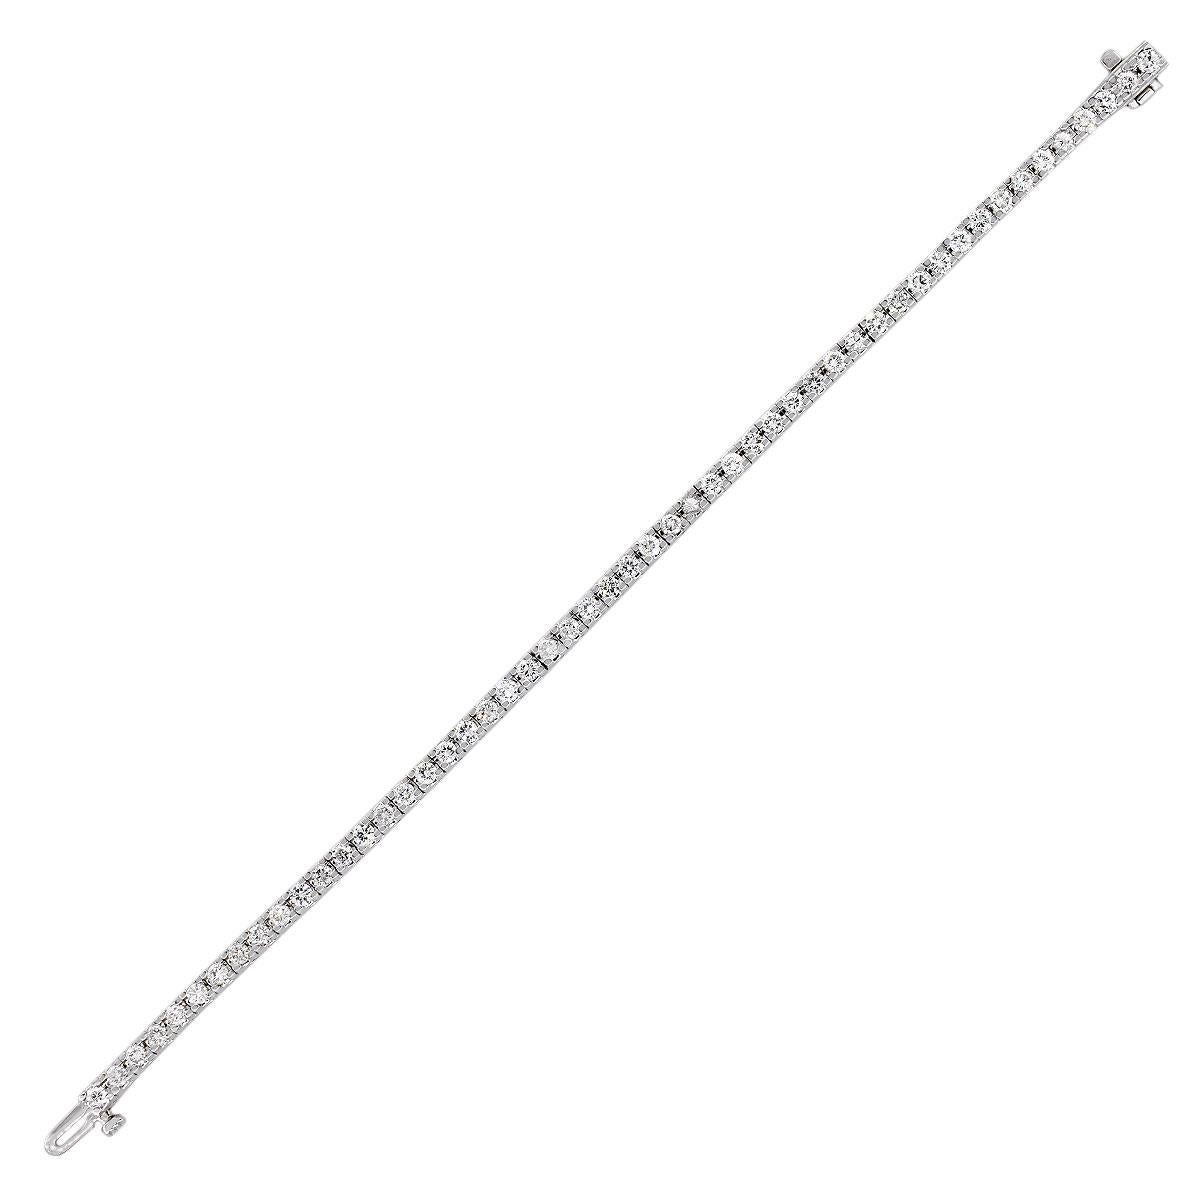 Material: 14k White Gold
Diamond Details: Approximately 2.66ctw of round cut diamonds. Diamonds are G/H in color and SI in clarity
Clasp: Tongue in box with safety latch
Measurements: Will fit up to a 7″ wrist
Total Weight: 15.8g (9.8dwt)
SKU: G8413